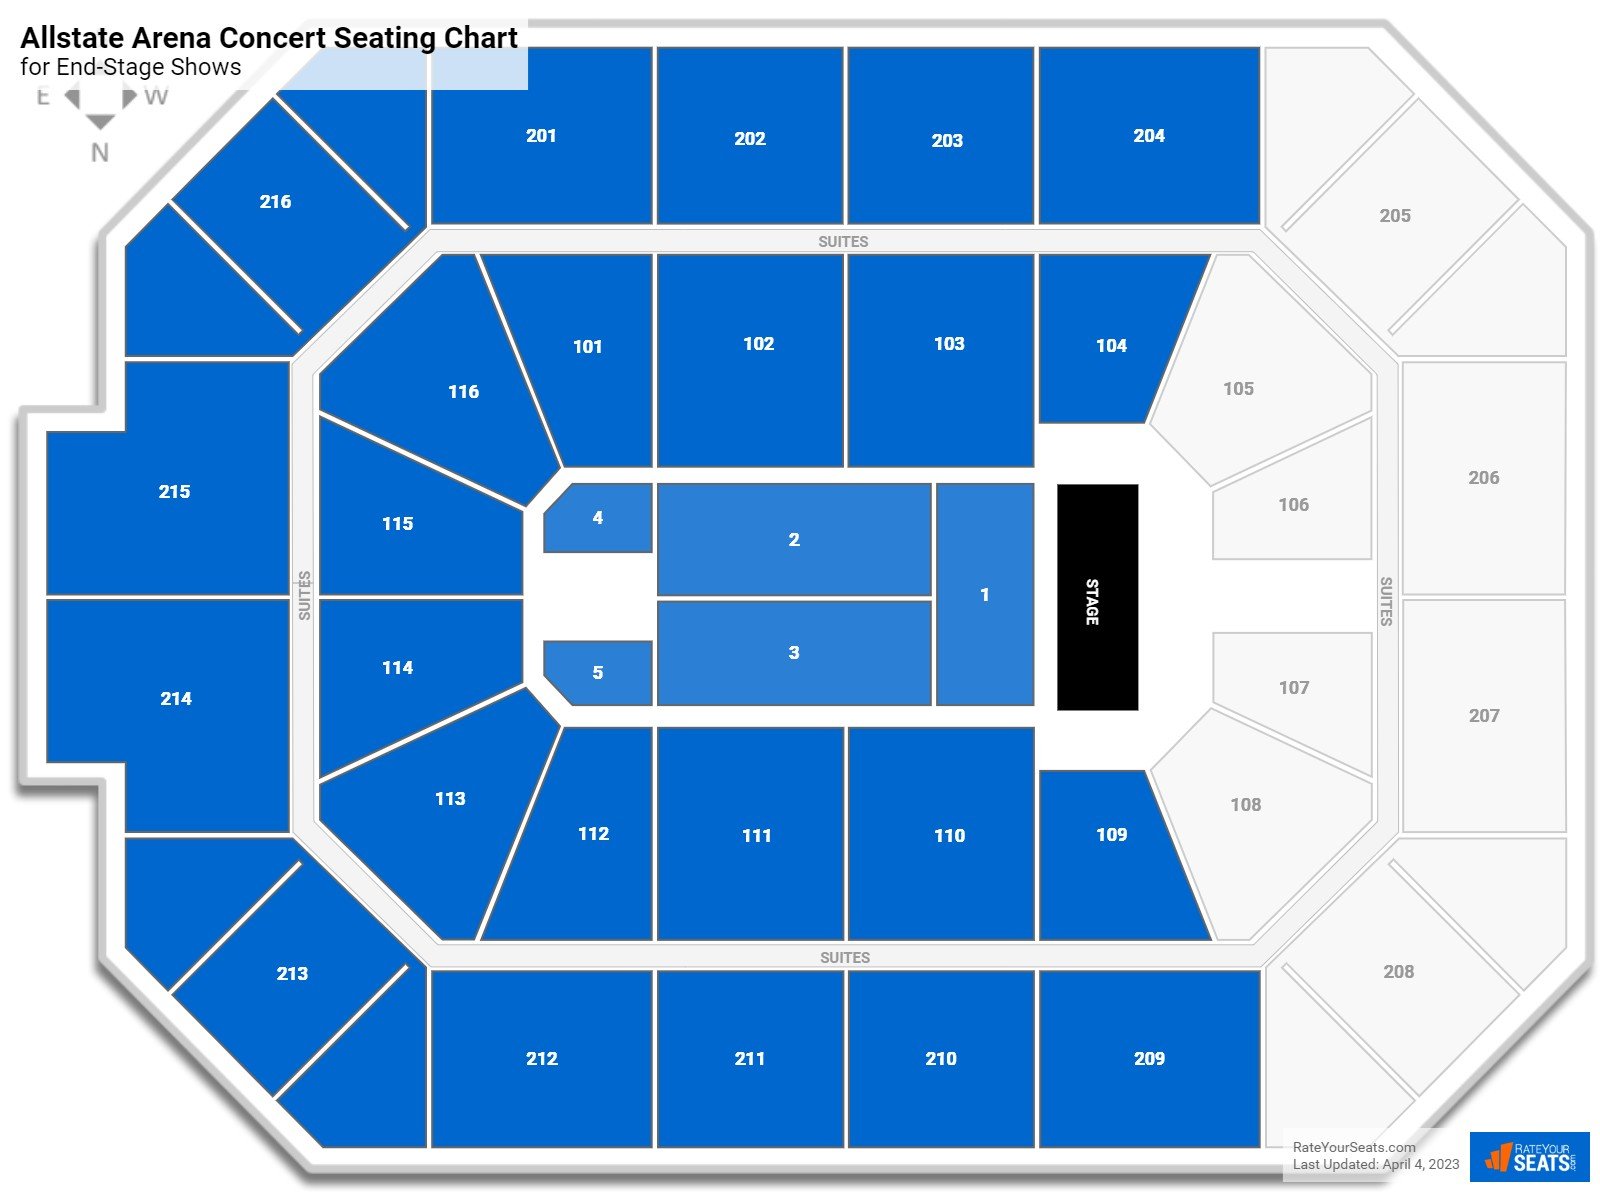 Allstate Arena Concert Seating Chart